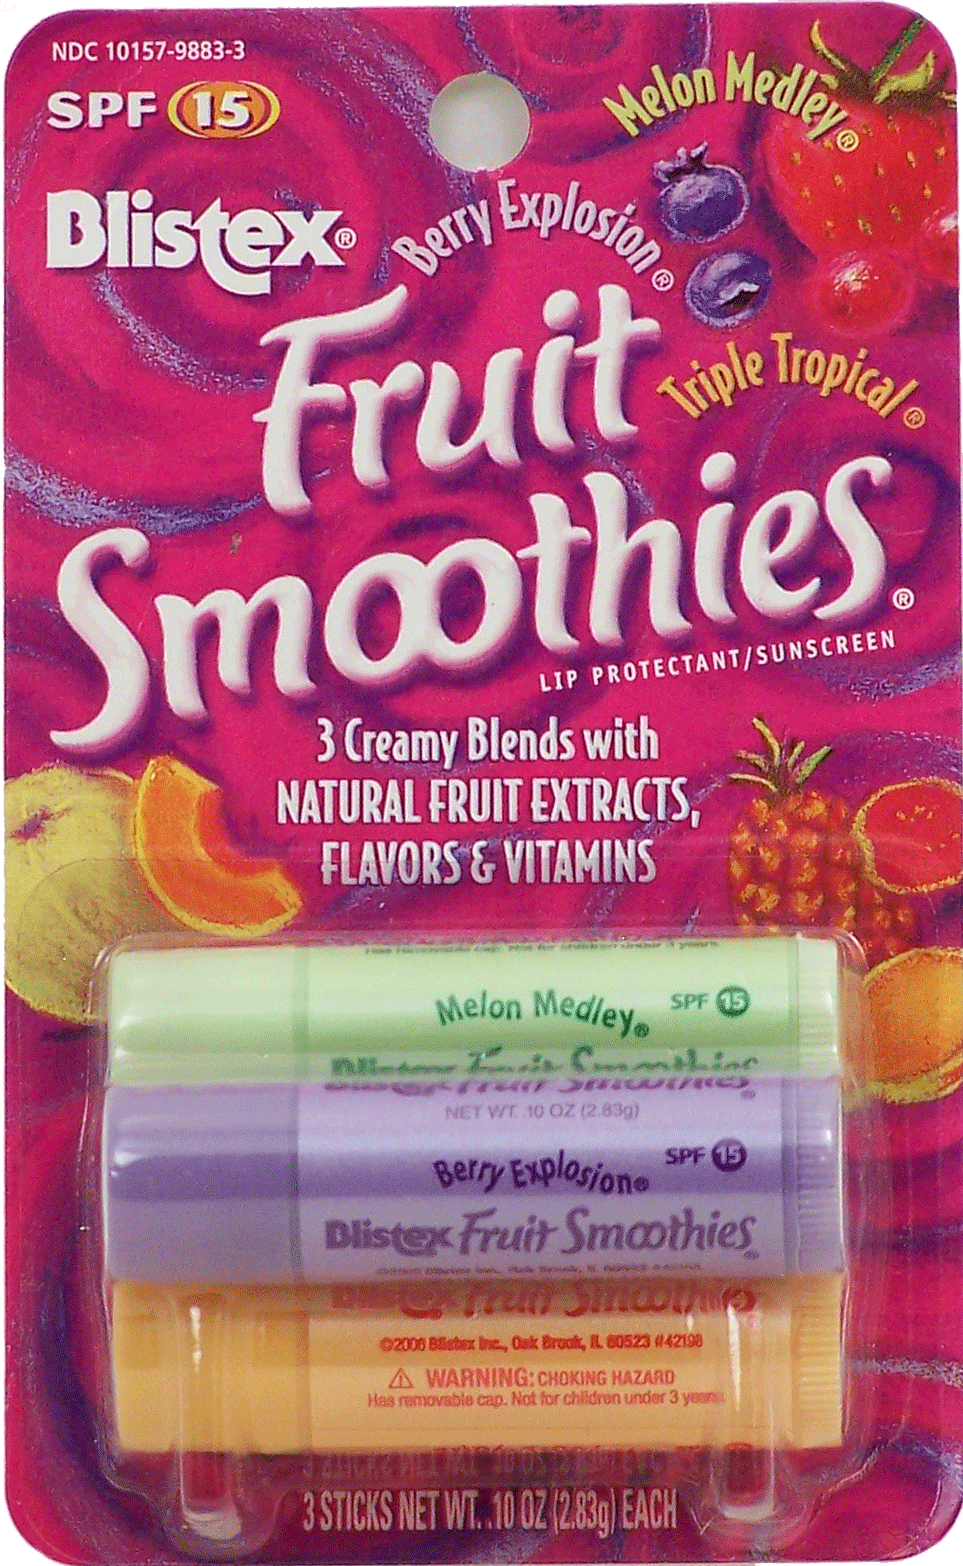 Blistex Fruit Smoothies Lip Protectant berry explosion, melon medley & triple tropical, spf 15 Full-Size Picture